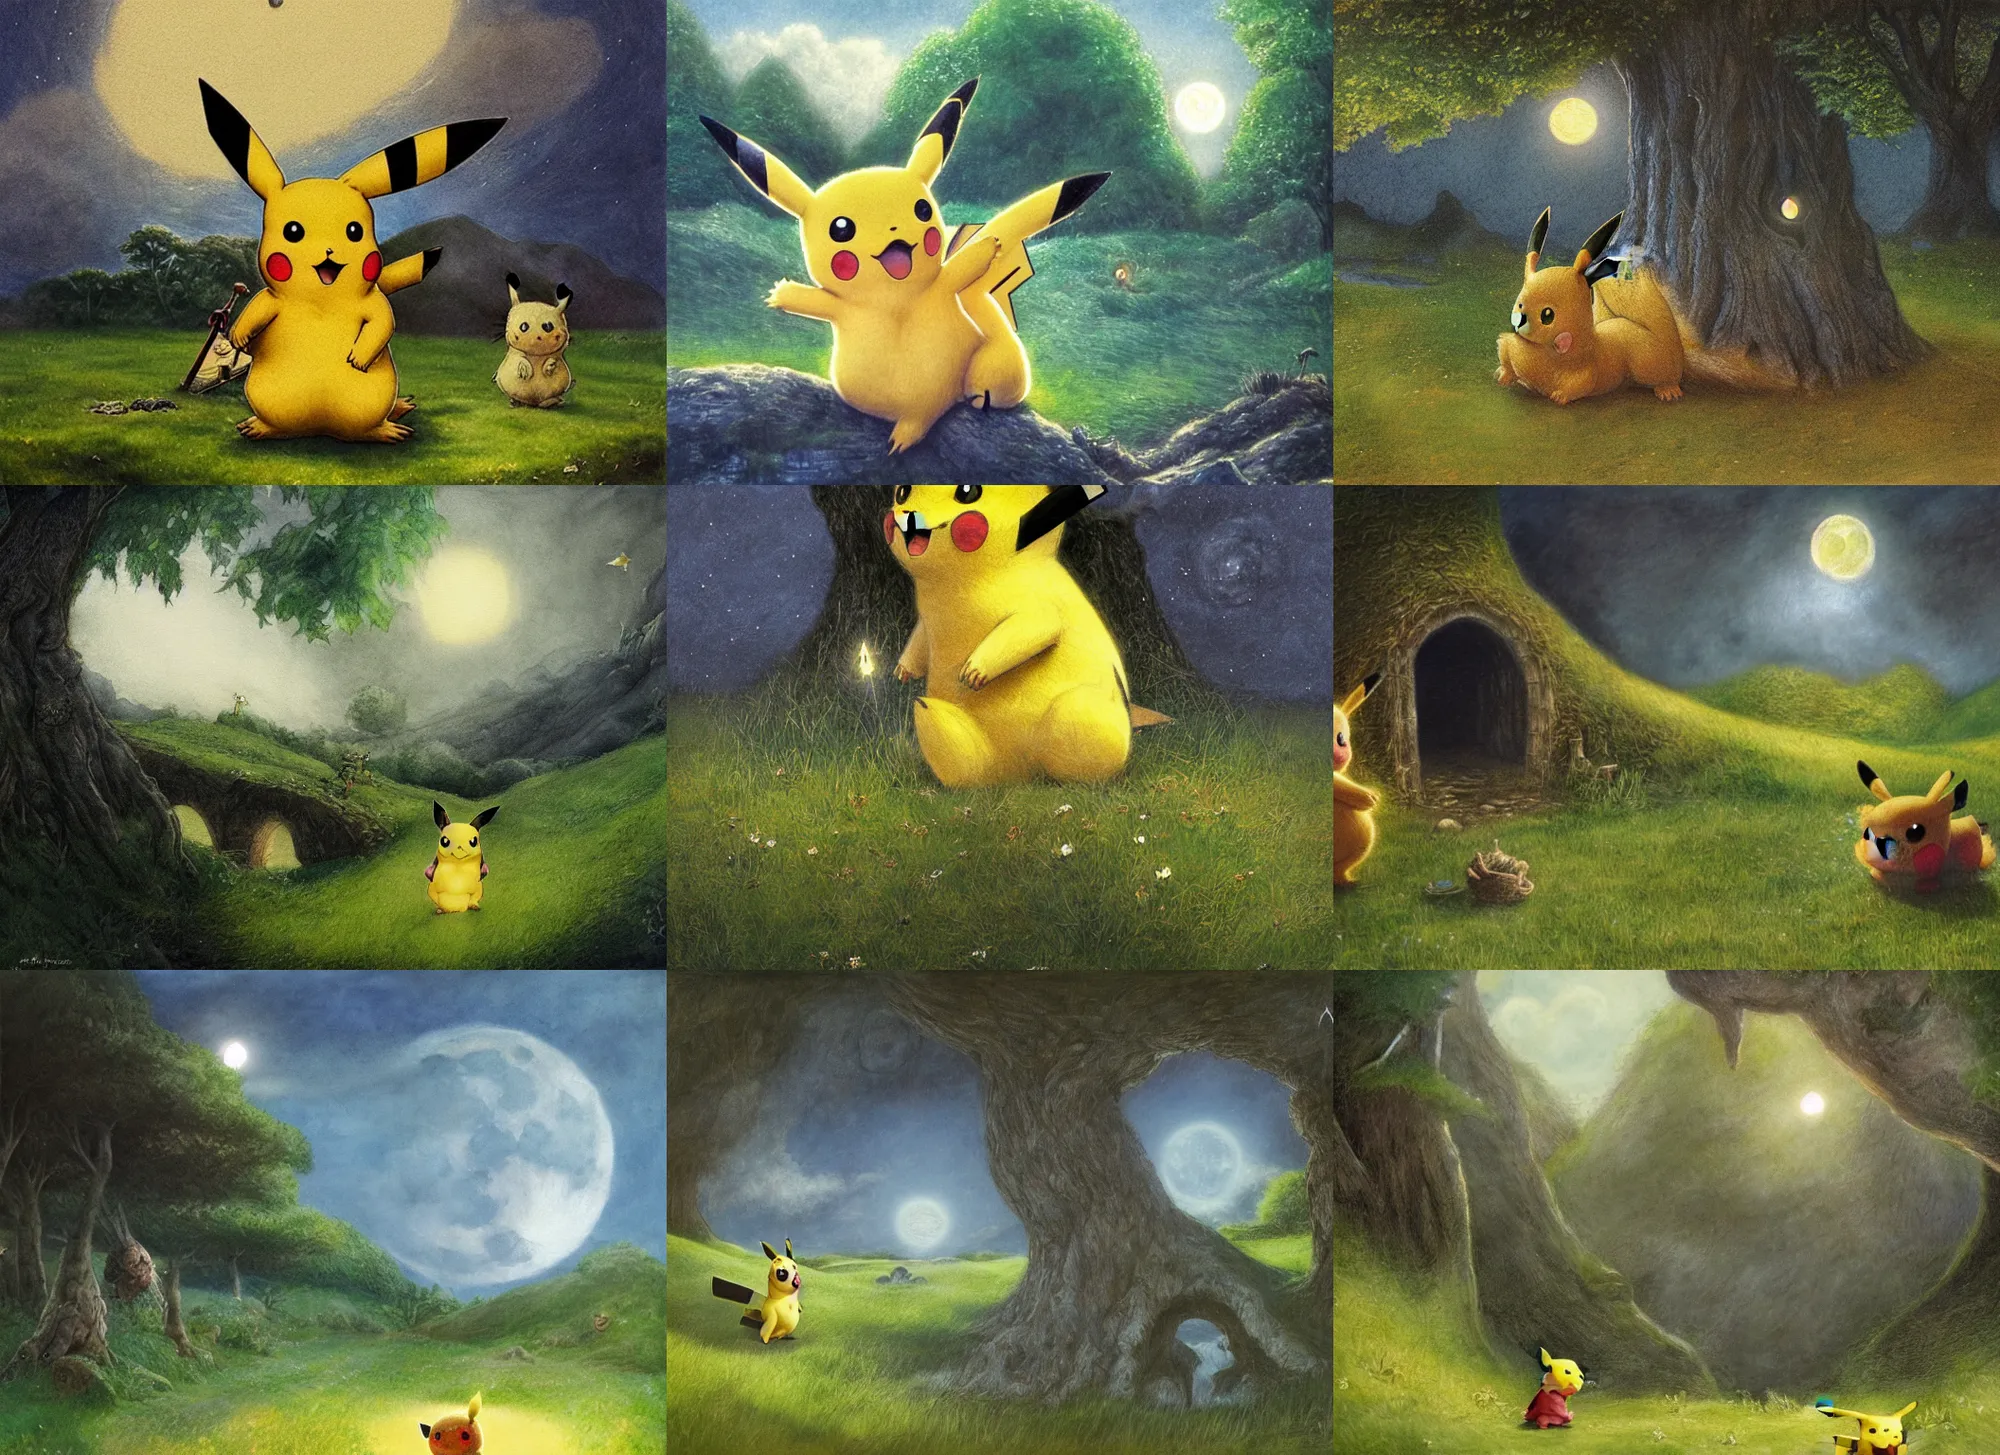 Prompt: Pikachu in the Shire by Alan Lee, moonlight, concept art, detailed clothing, art station, oil painting